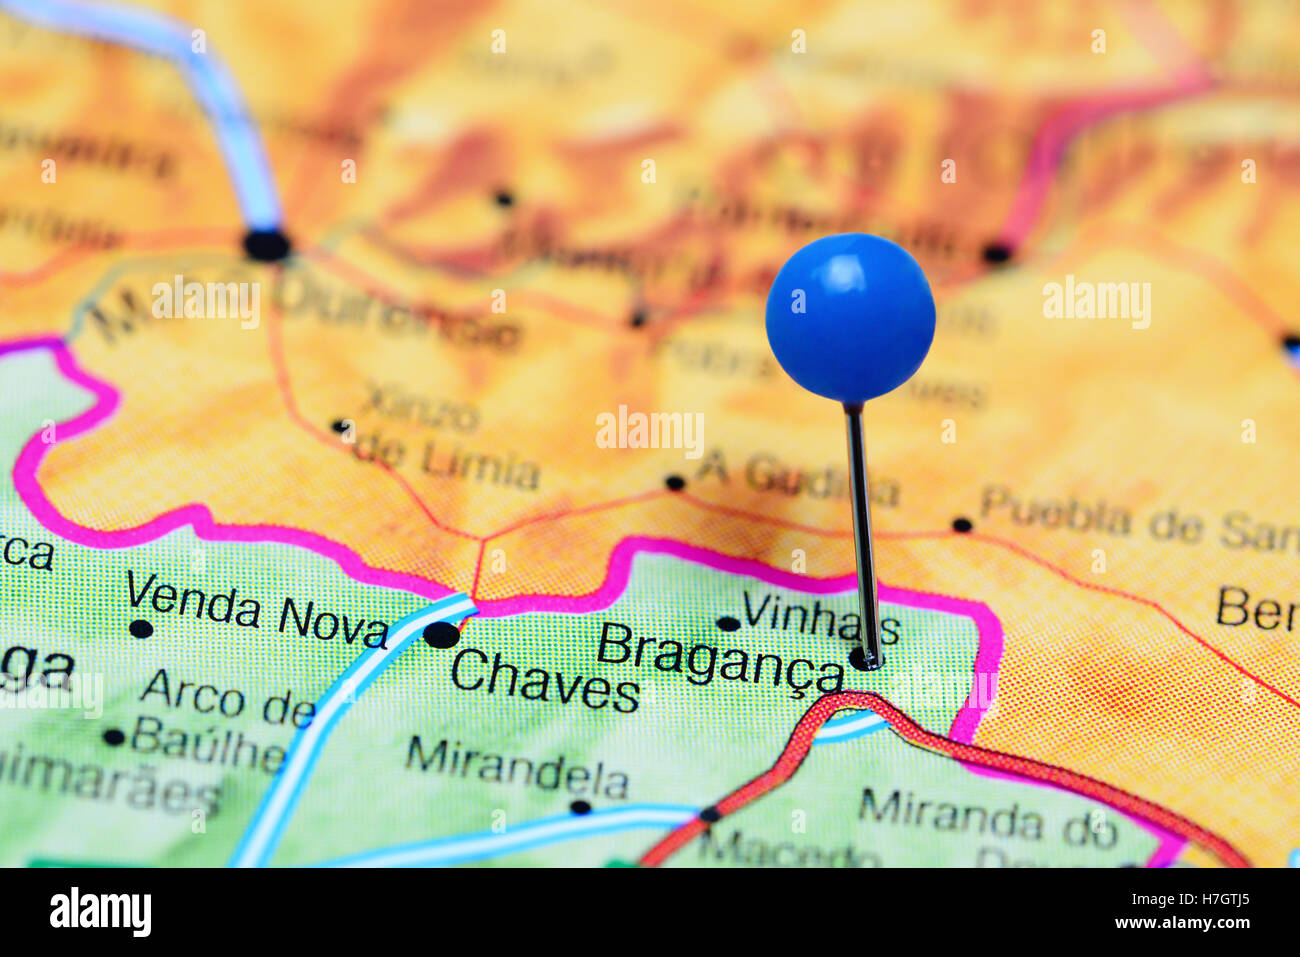 Braganca pinned on a map of Portugal Stock Photo